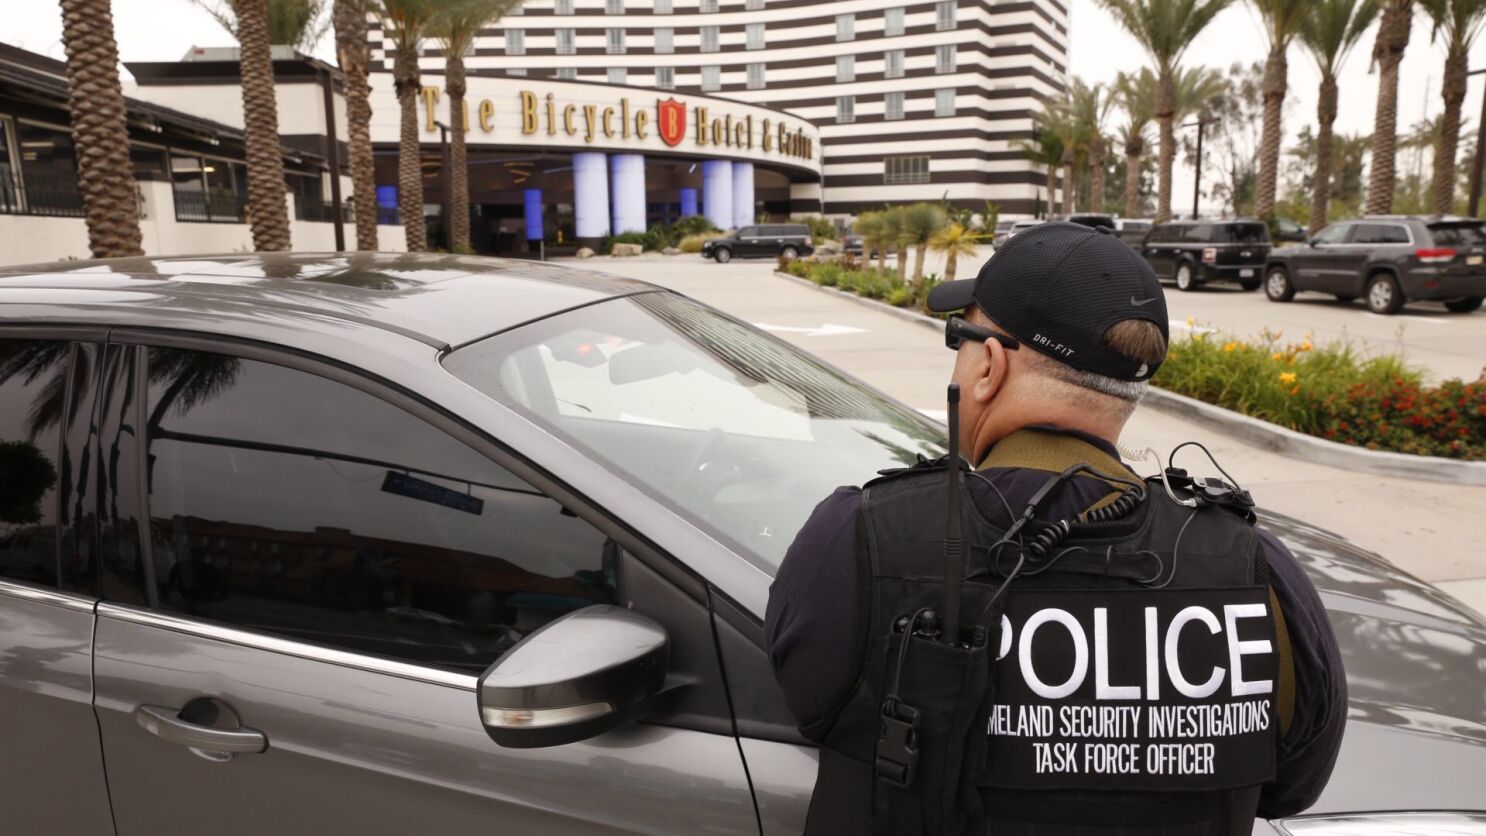 Federal Authorities Raid Bicycle Hotel And Casino In Bell Gardens